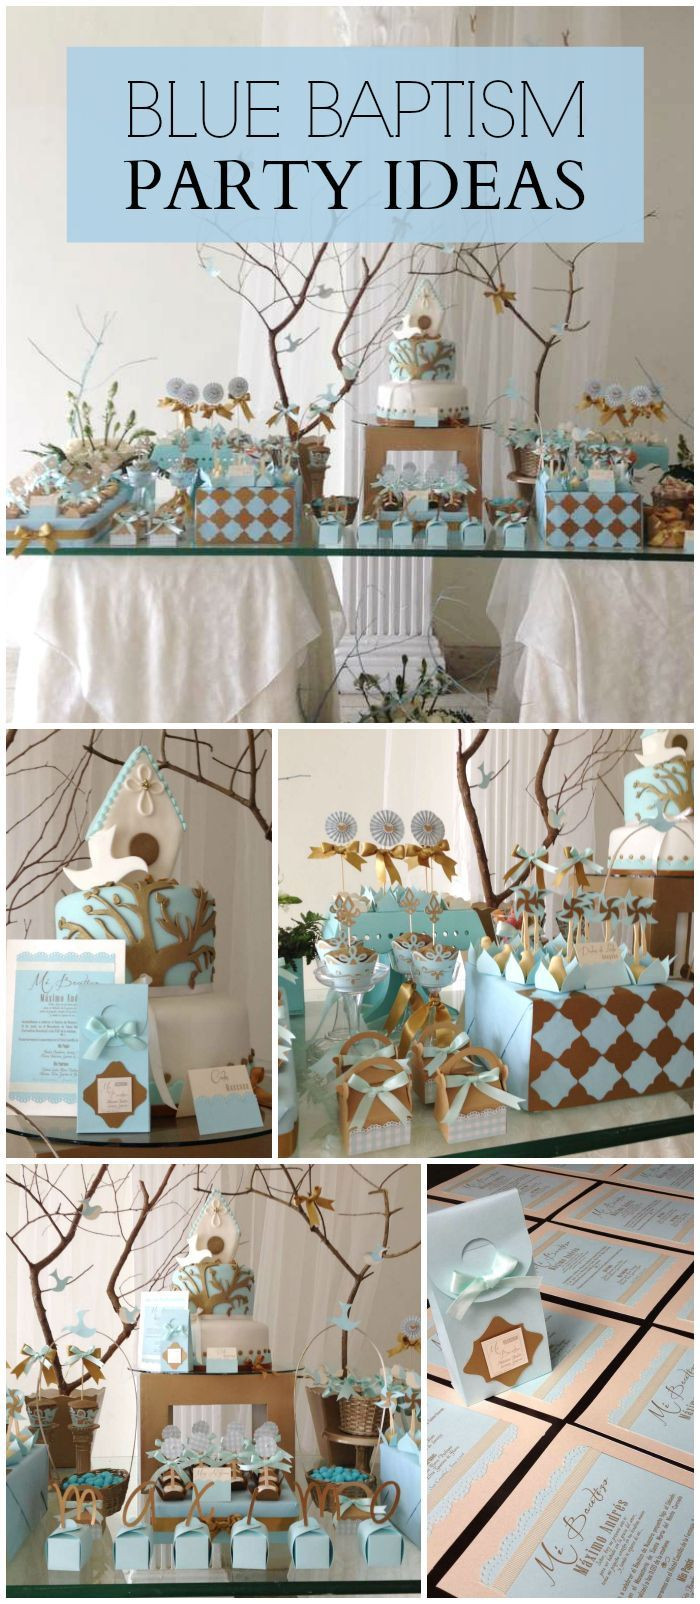 Christening Party Ideas For Baby Boy
 A blue baptism party for a baby boy with lovely party